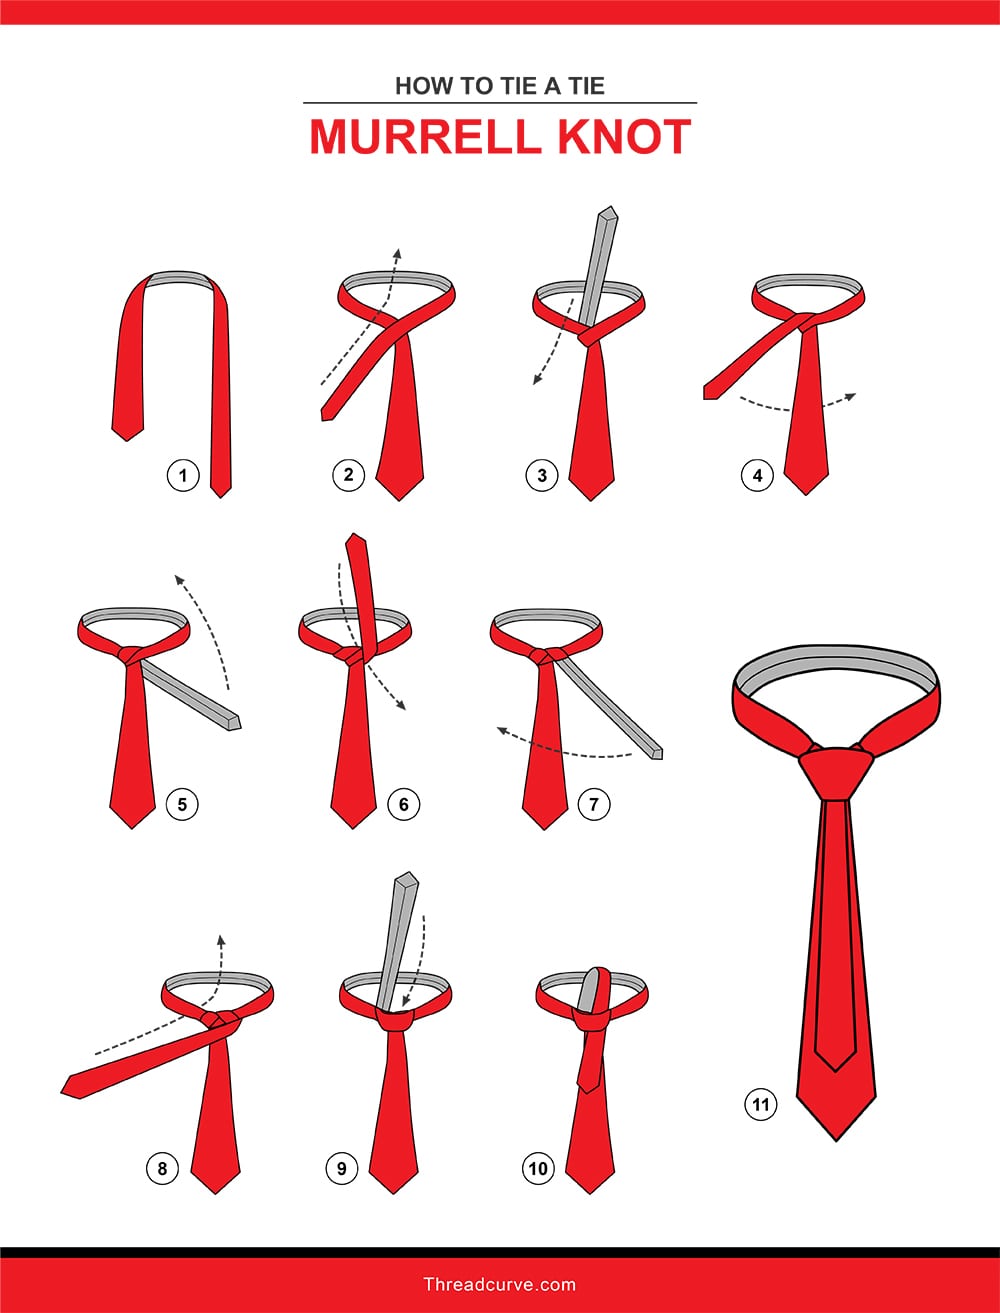 How to tie a Murrell knot (illustration)